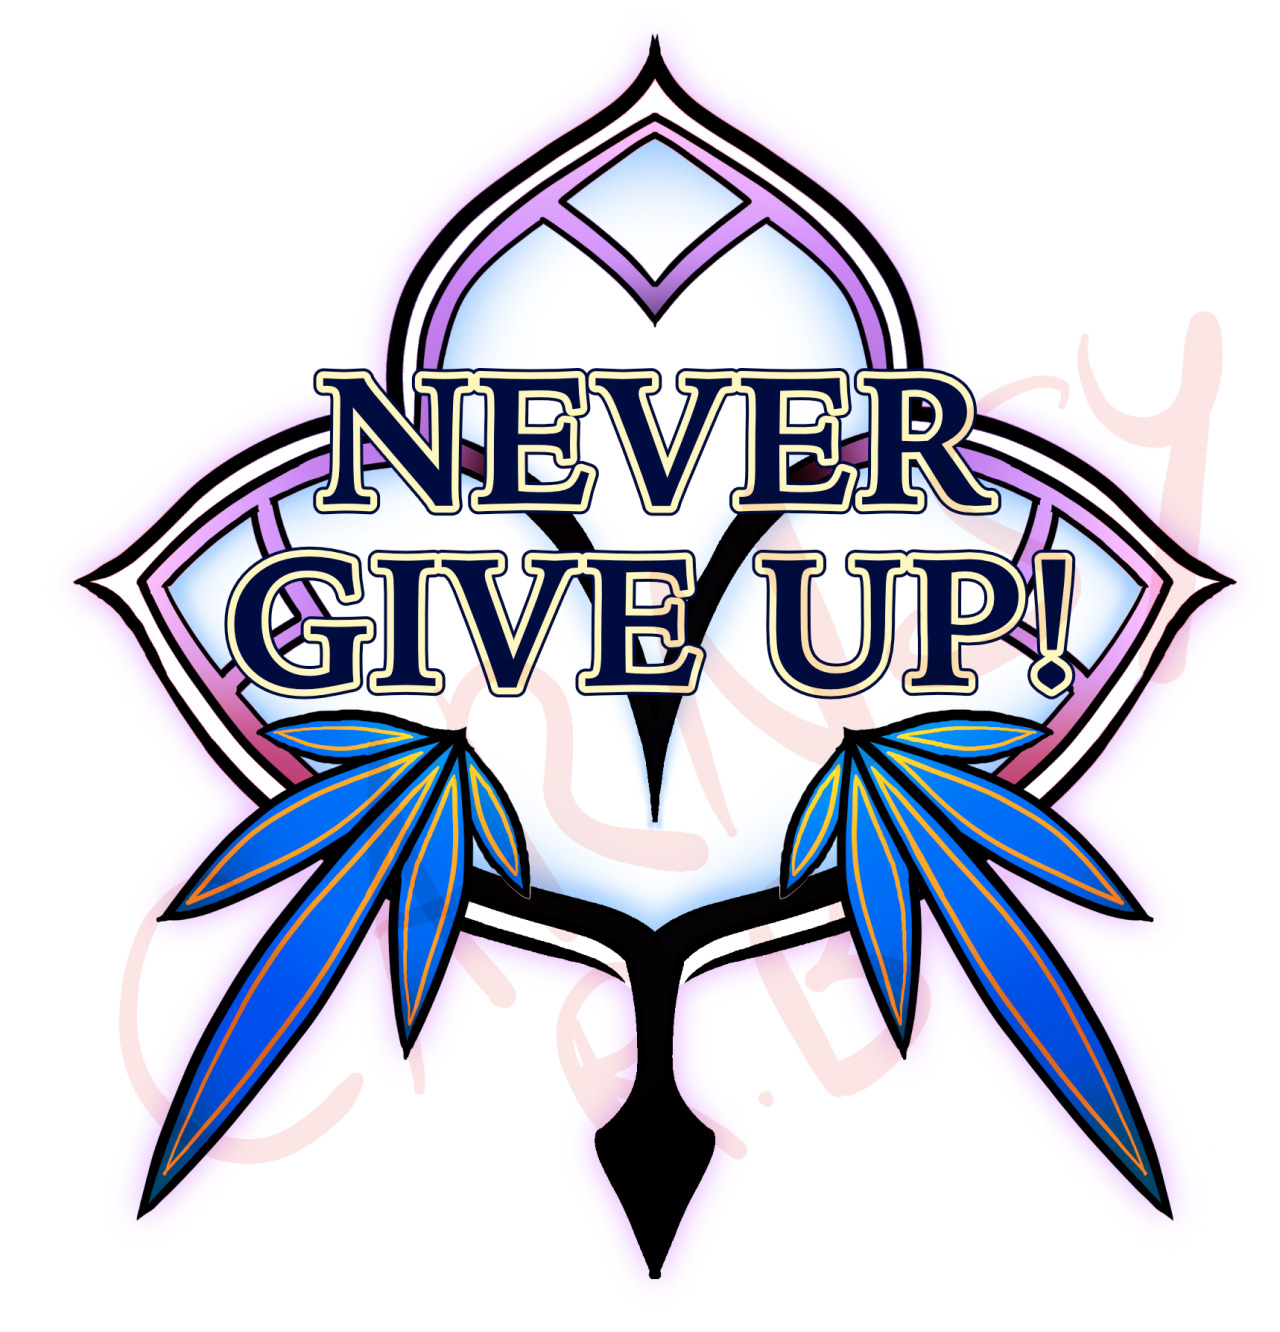 A new lil logo I did based on Tales of Graces and the friendship trio ...